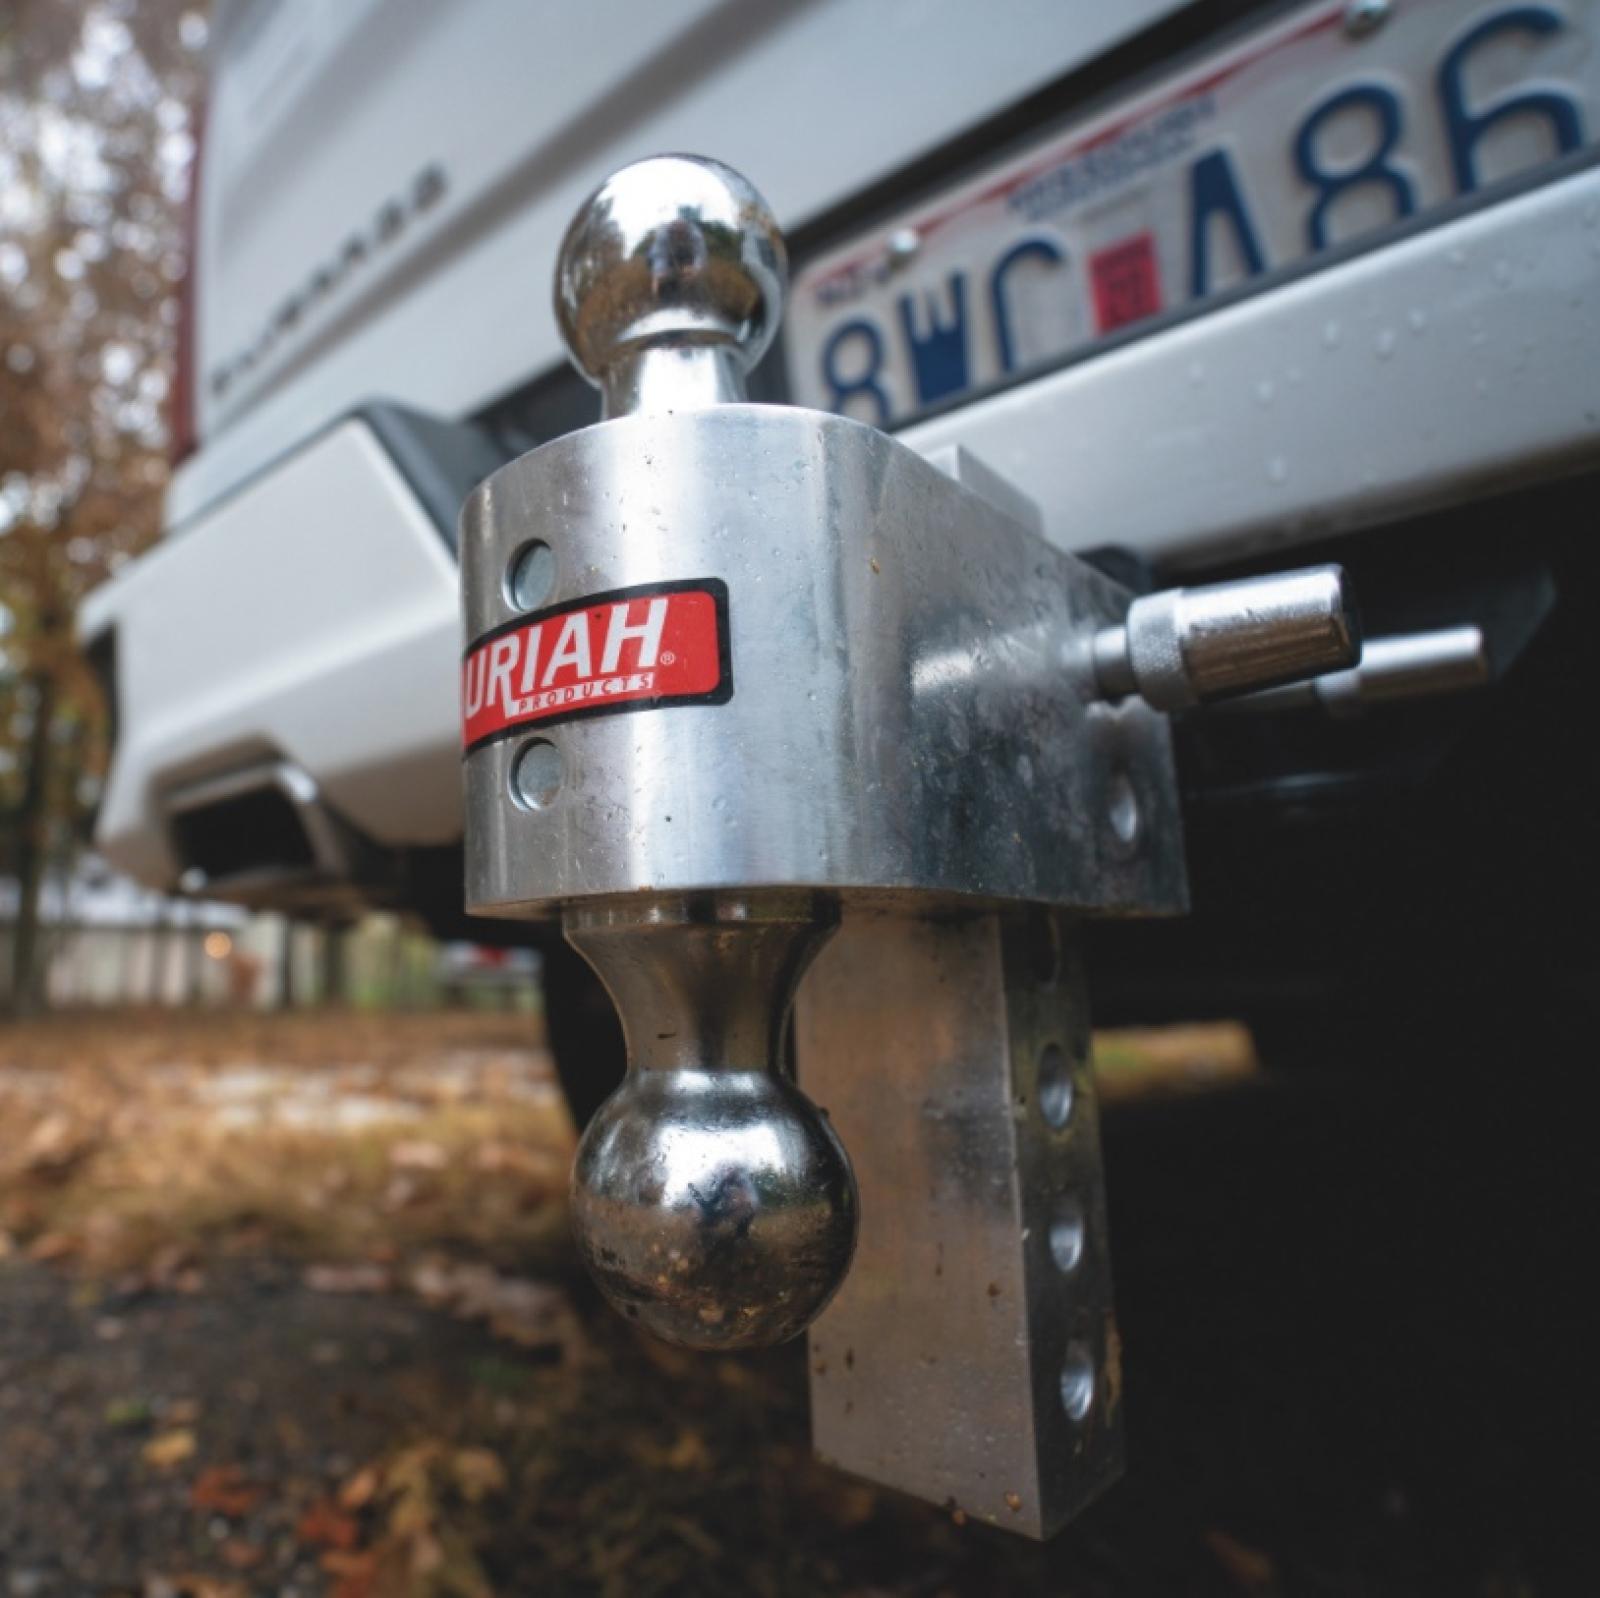 Uriah Aluma-Tow Hitch Mount with 6" Drop On a Truck